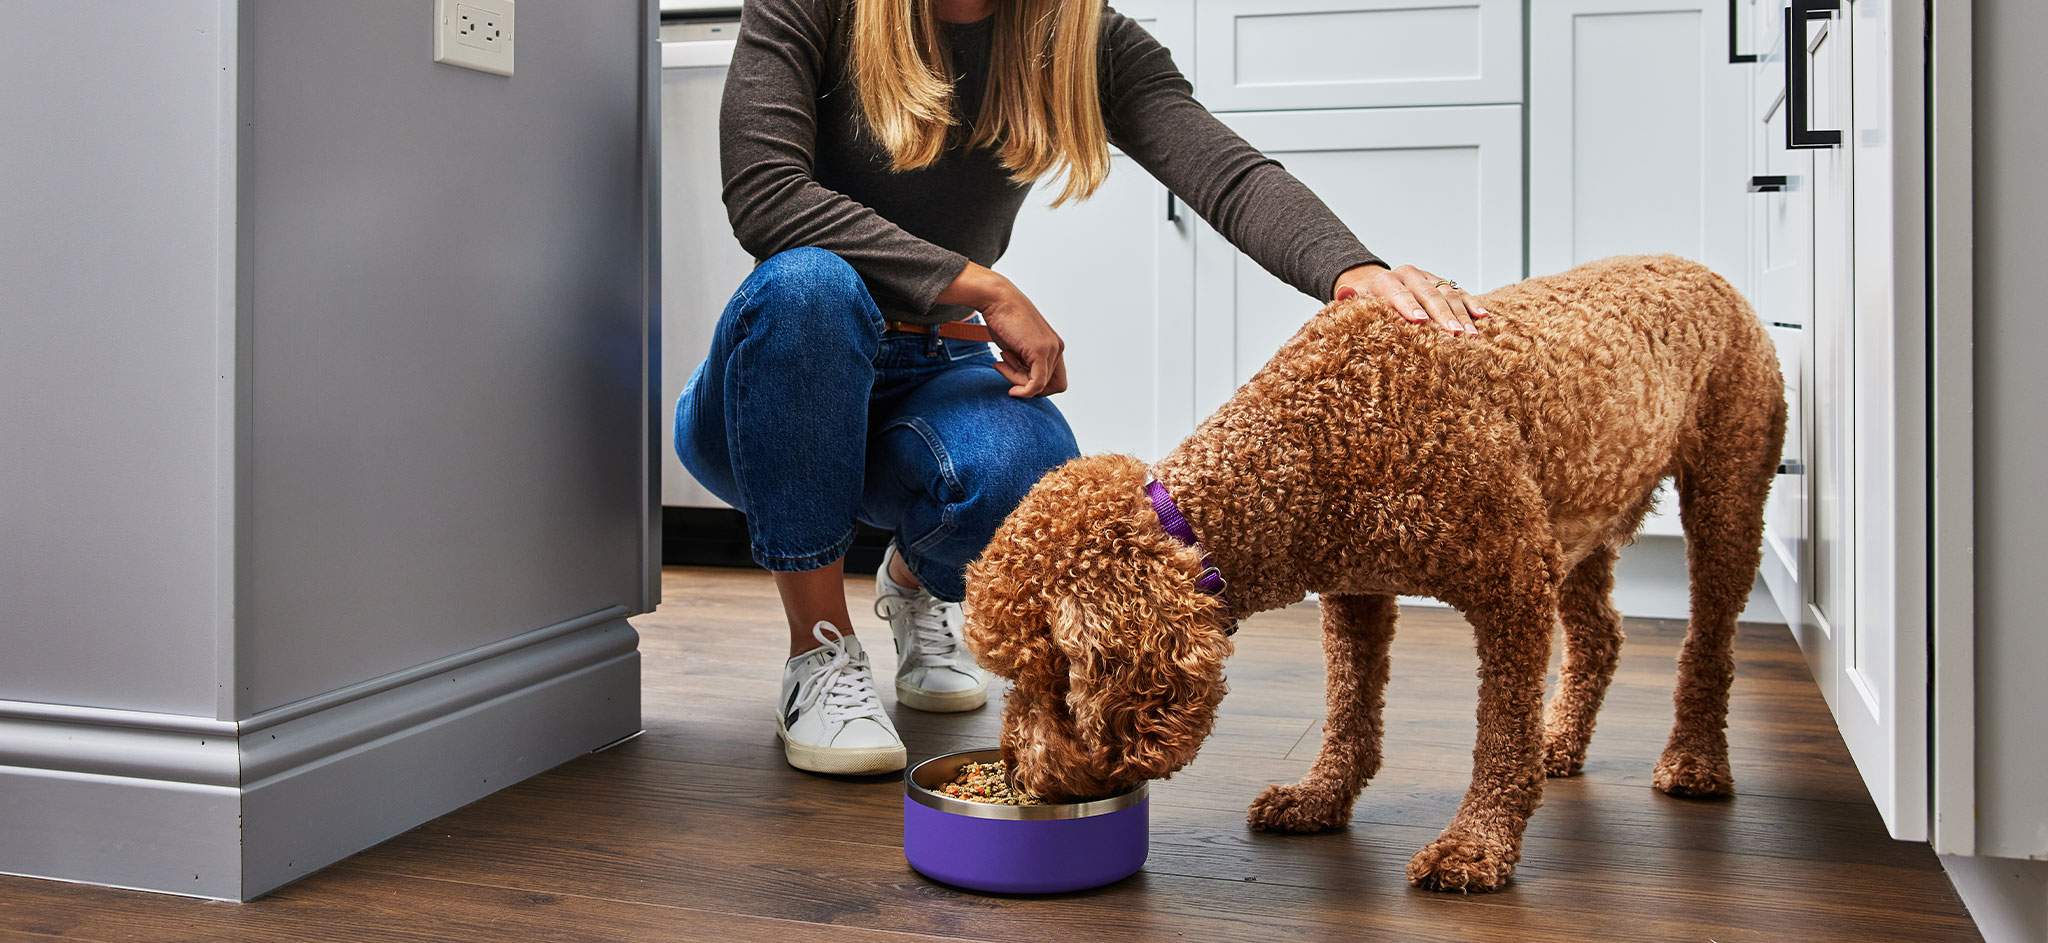 Wellness dry dog food recipes are thoughtfully crafted and scientifically proven to support the 5 Signs of WellbeingTM. Every recipe is made with high-quality ingredients to support whole-body health so that you and your dog can share a life of wellbeing together.